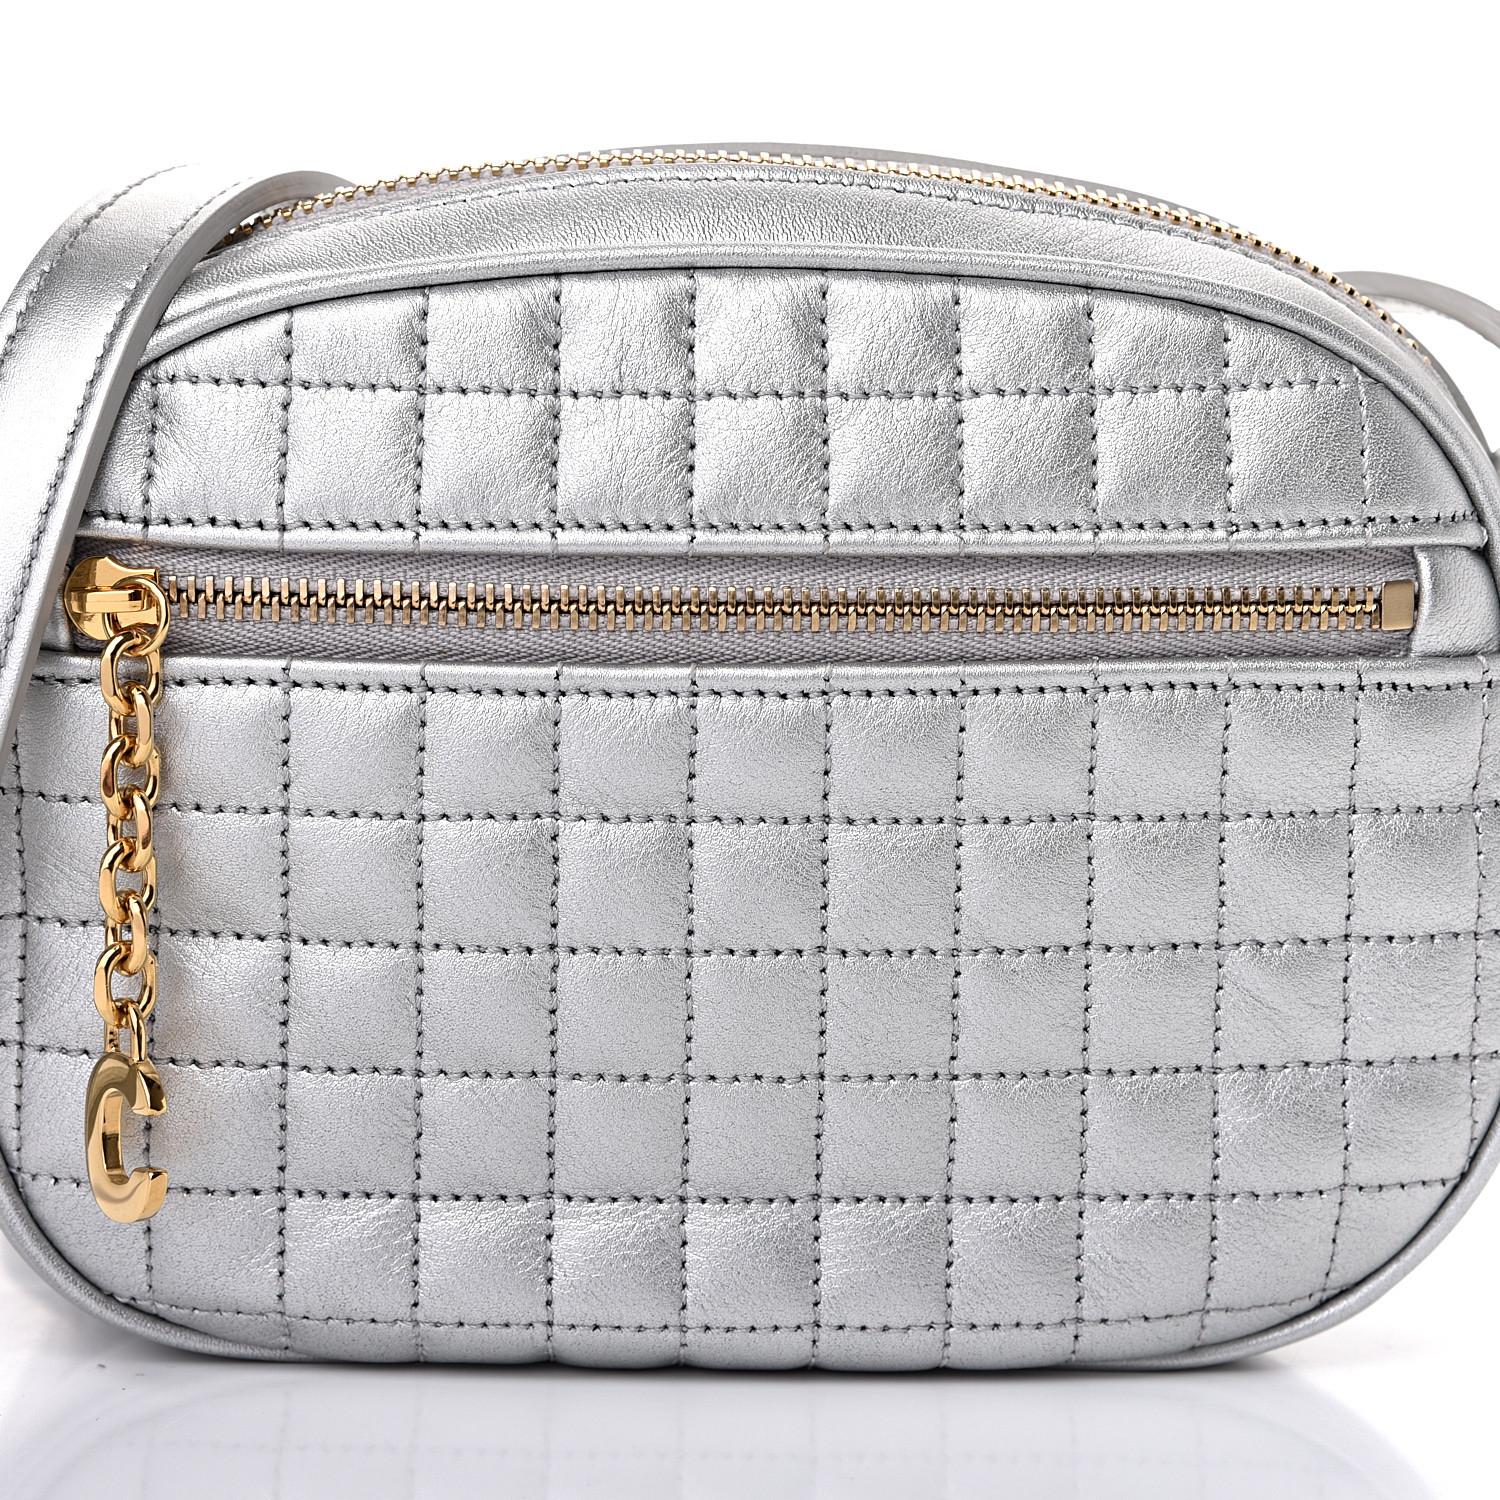 CELINE Laminated Calfskin Quilted Small C Charm Camera Bag Silver 547211